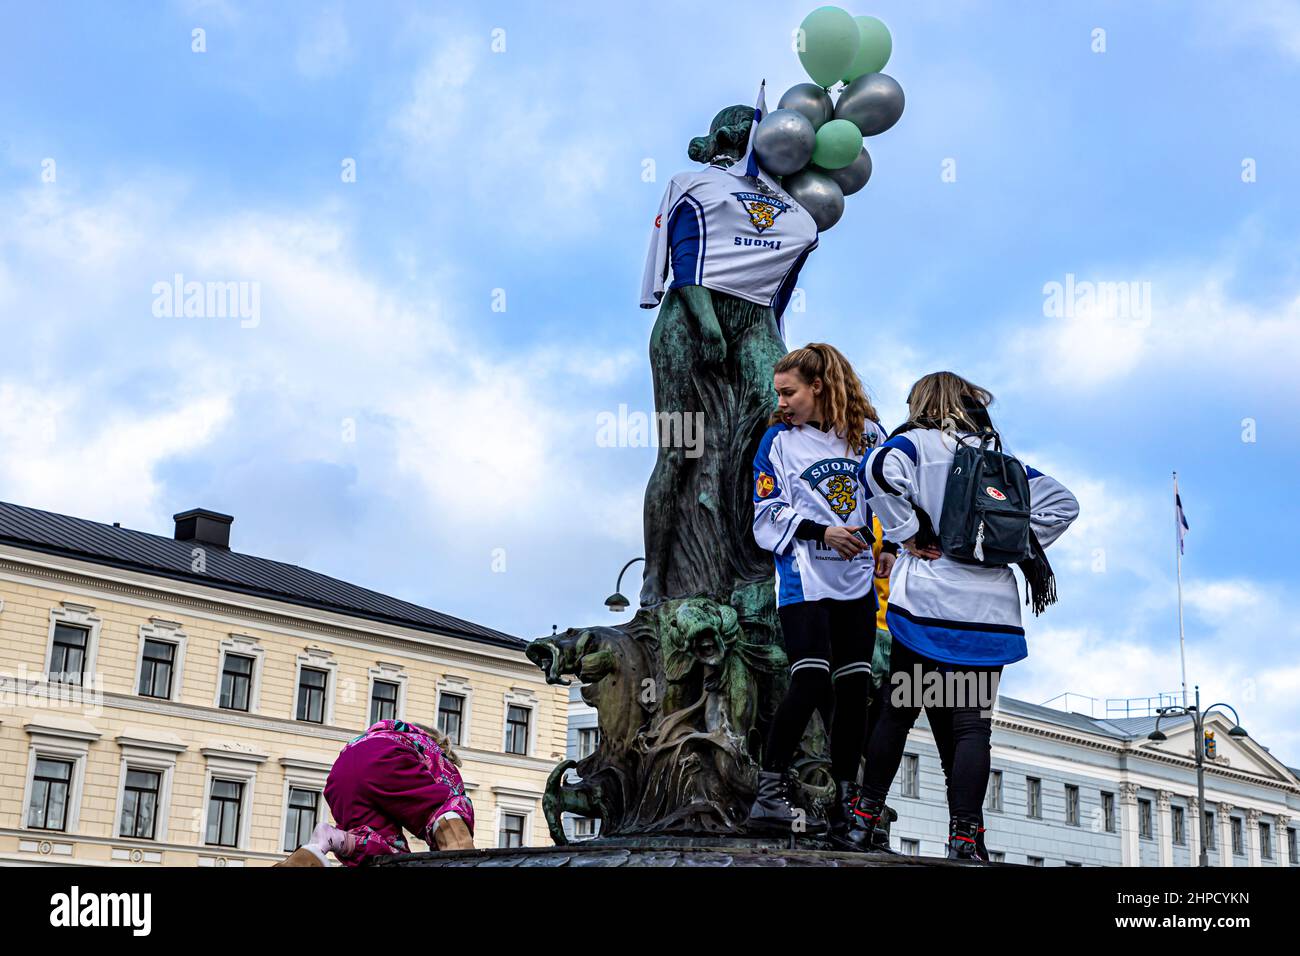 Hockey fans on the Havis Amanda statue in the Helsinki Market Square, one fan reacting to a small child being pushed up onto the statue. Stock Photo